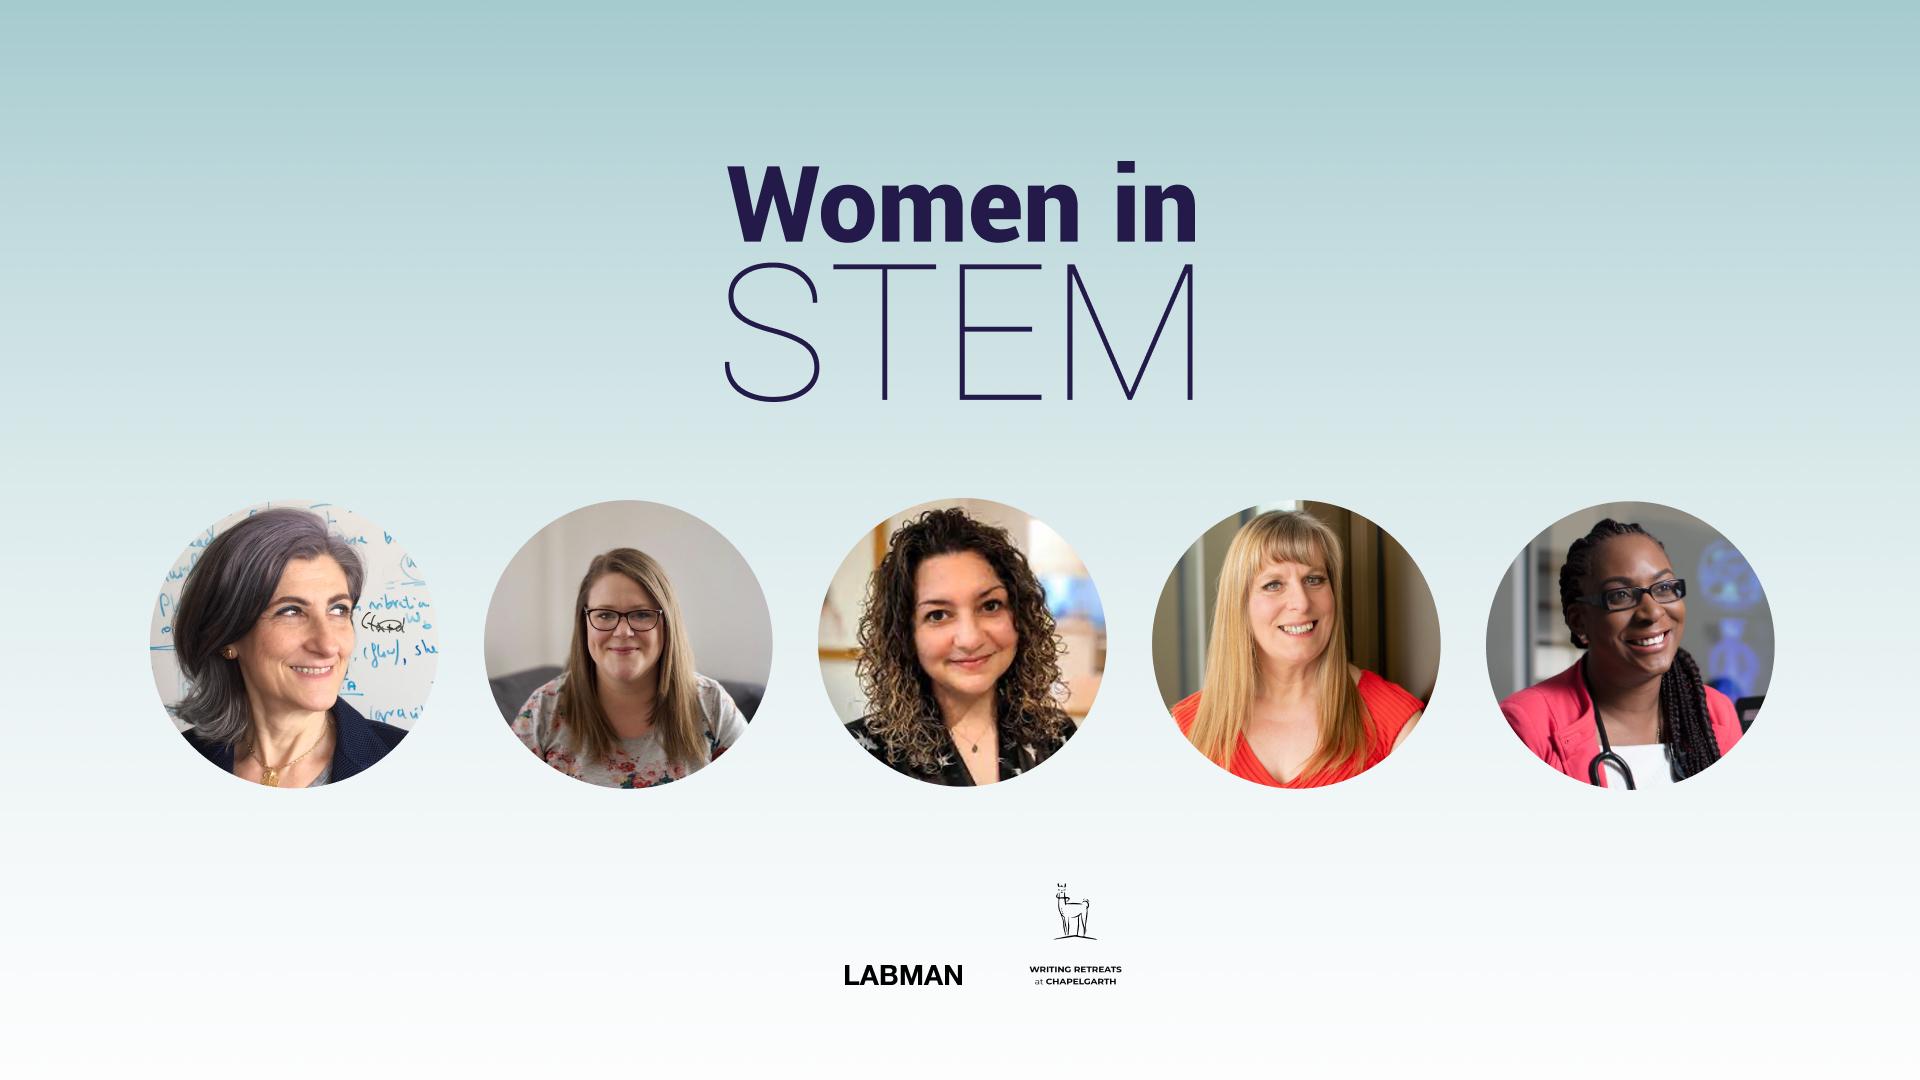 Women in STEM event at Labman visual